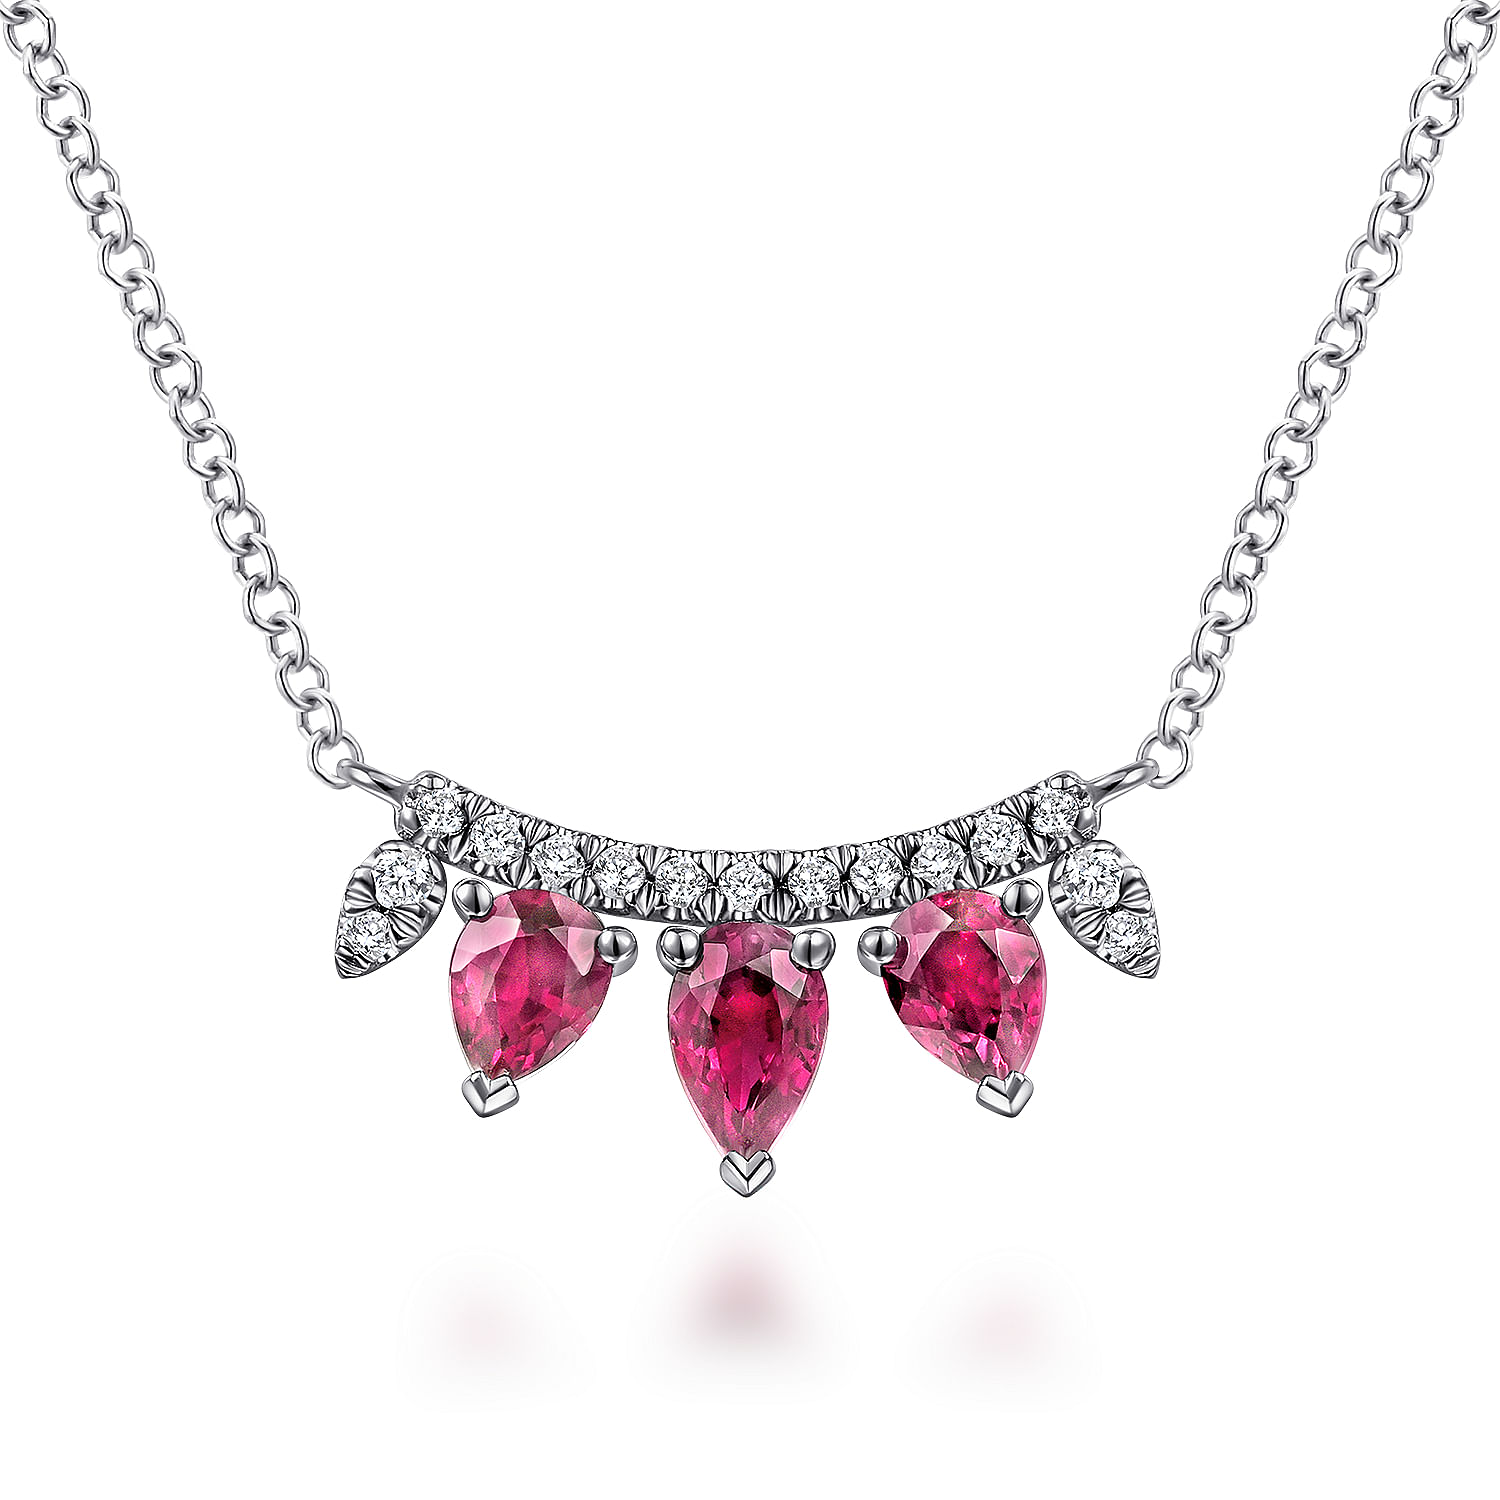 14K White Gold Pear Shaped Ruby and Diamond Bar Pendant Necklace